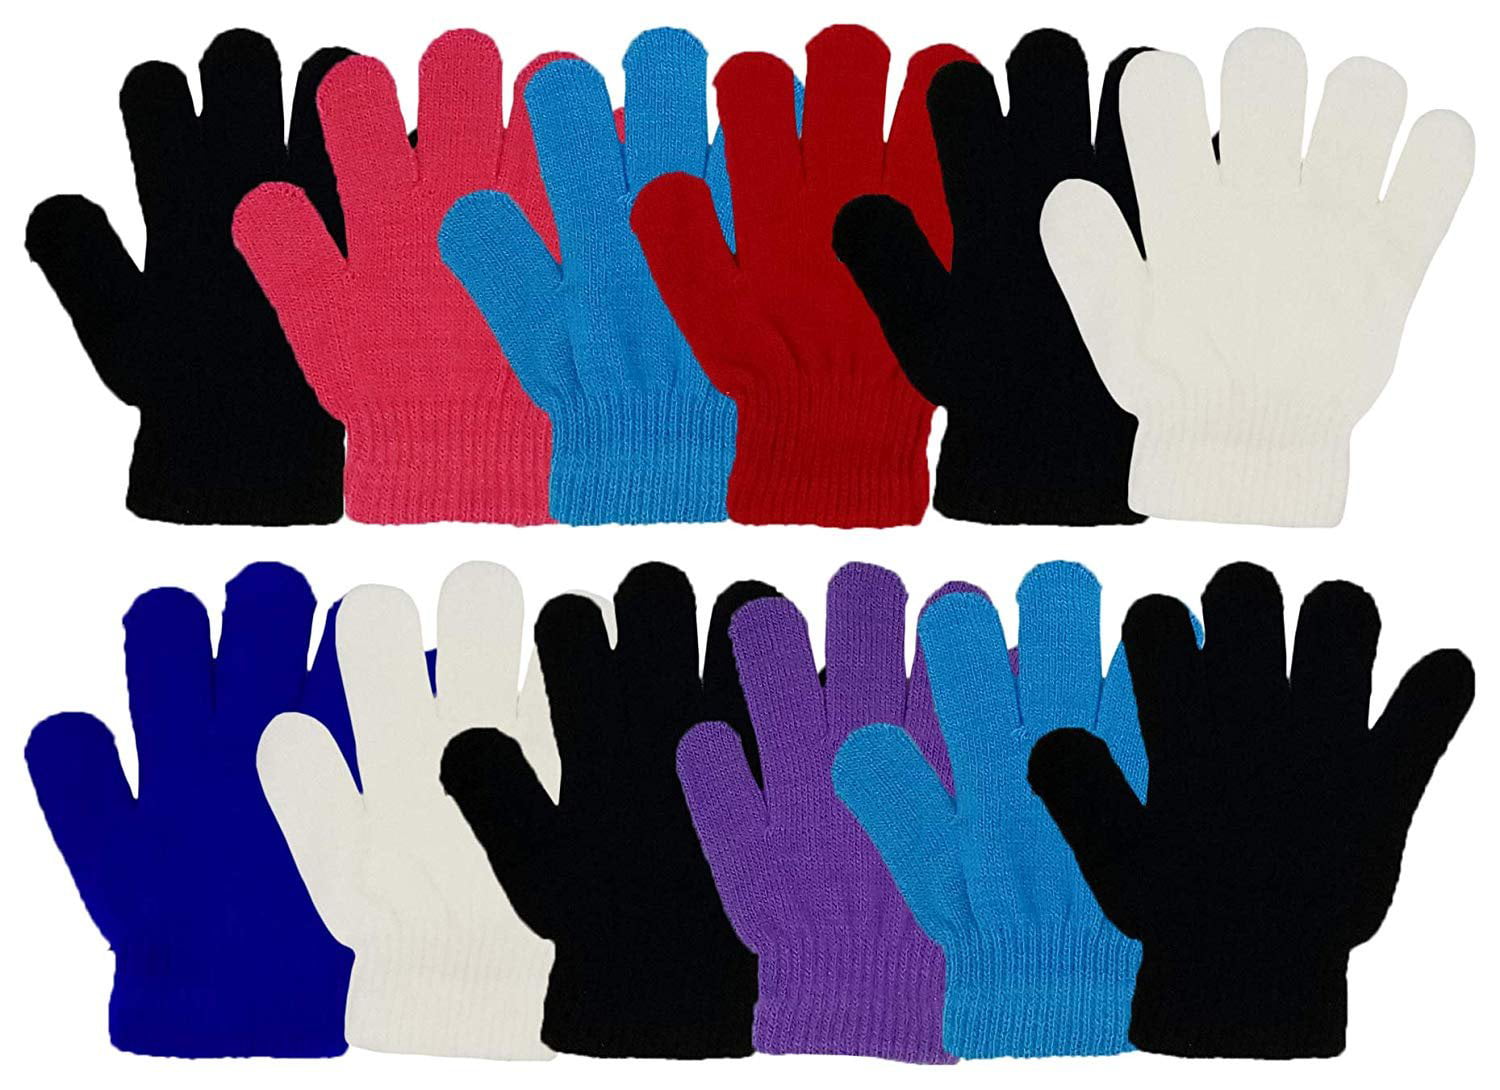 Sumind 12 Pairs Winter Knitted Magic Stretch Gloves Anti-slip Knit Cotton Warm Gloves for Children